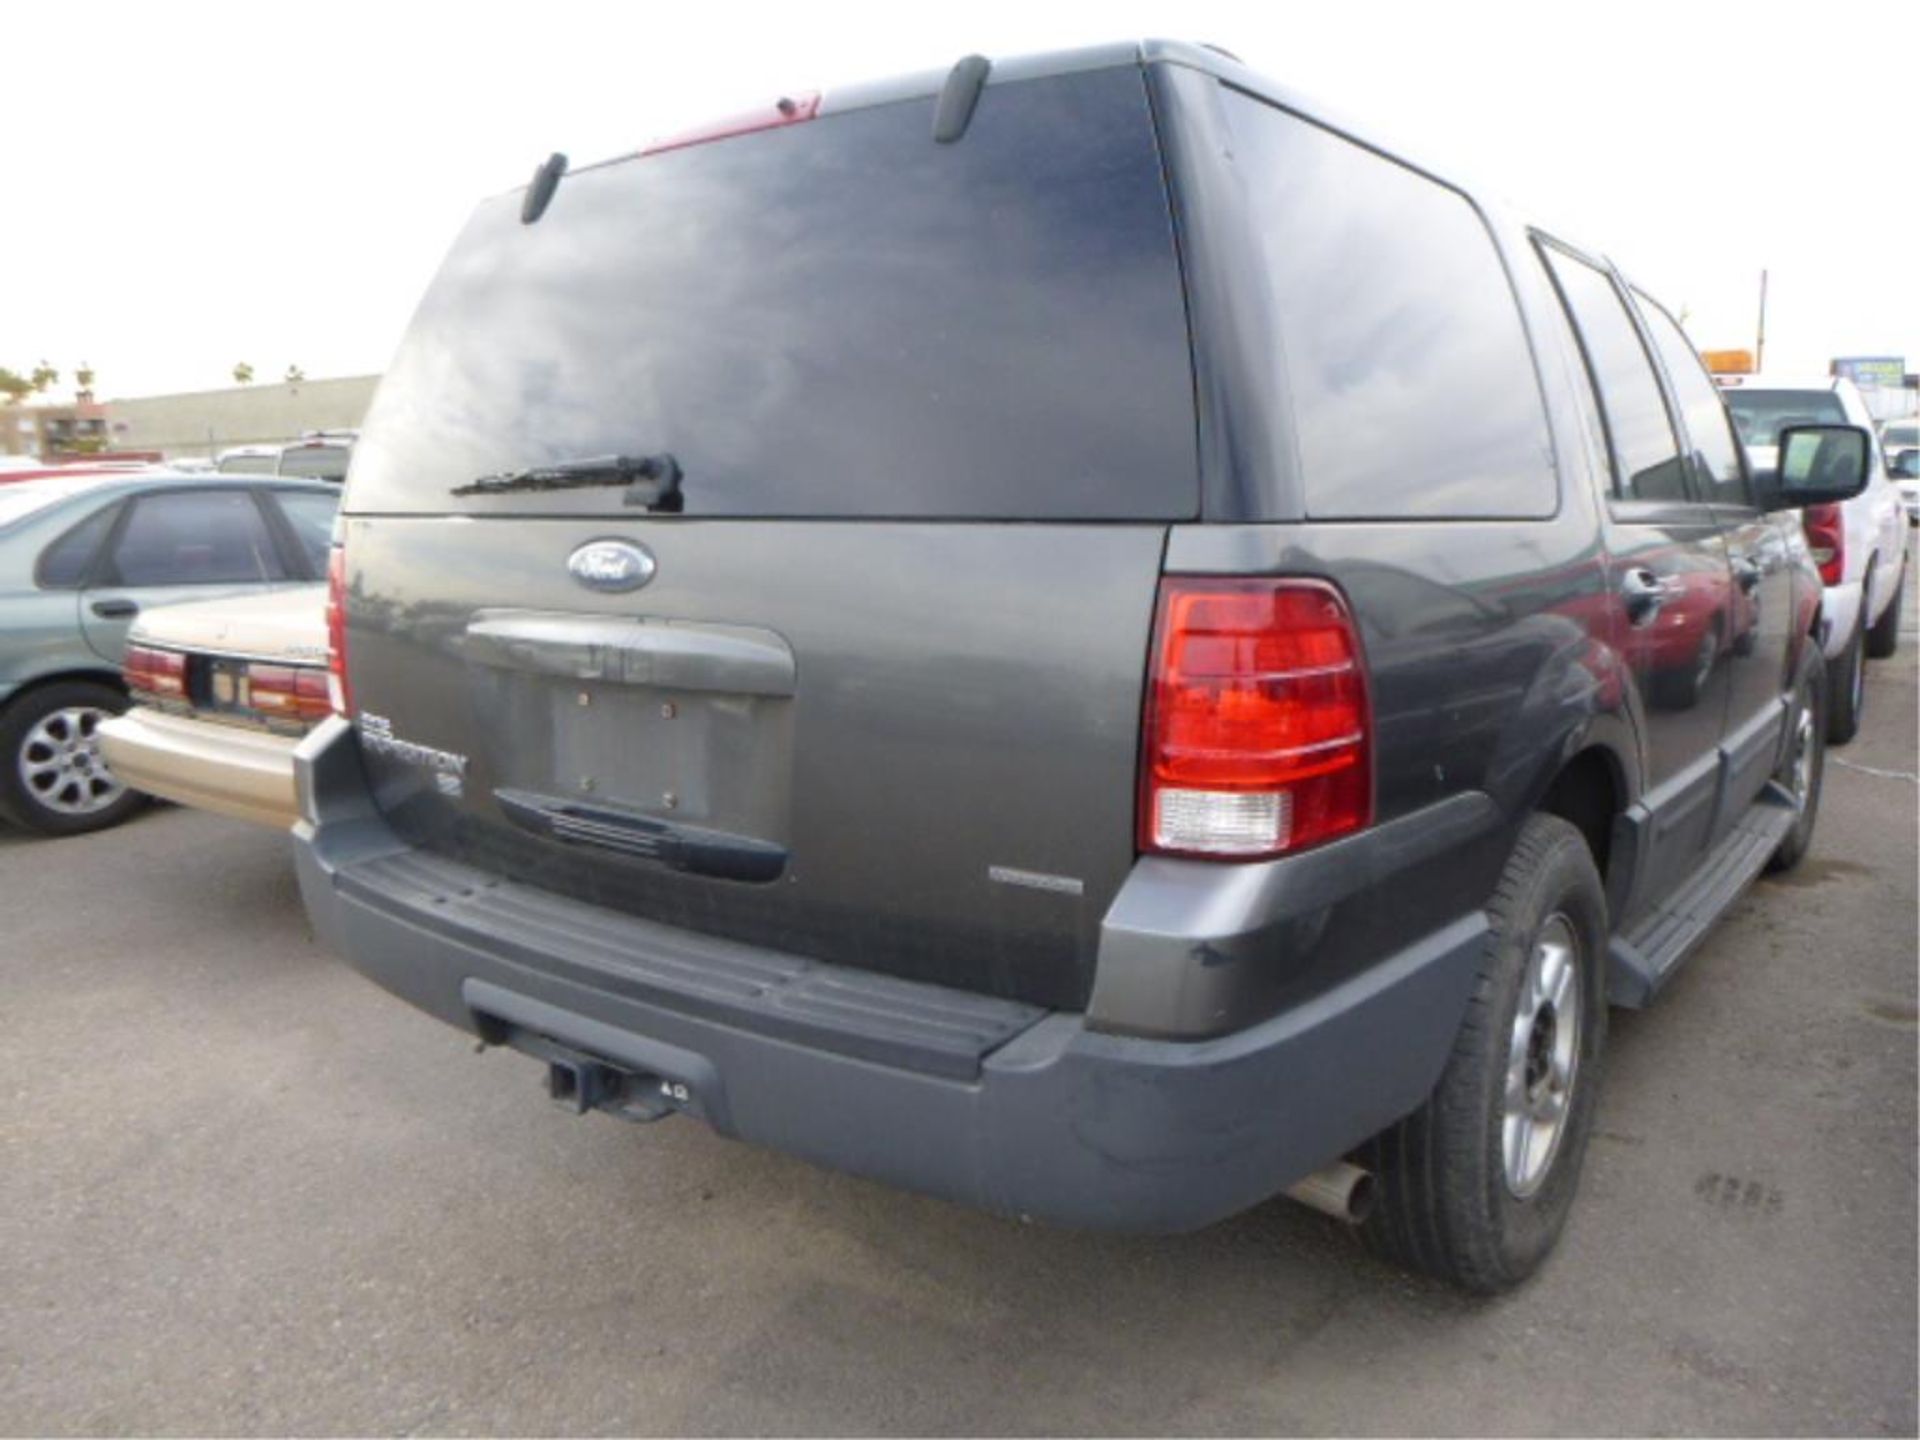 2004 Ford Expedition - Image 3 of 10